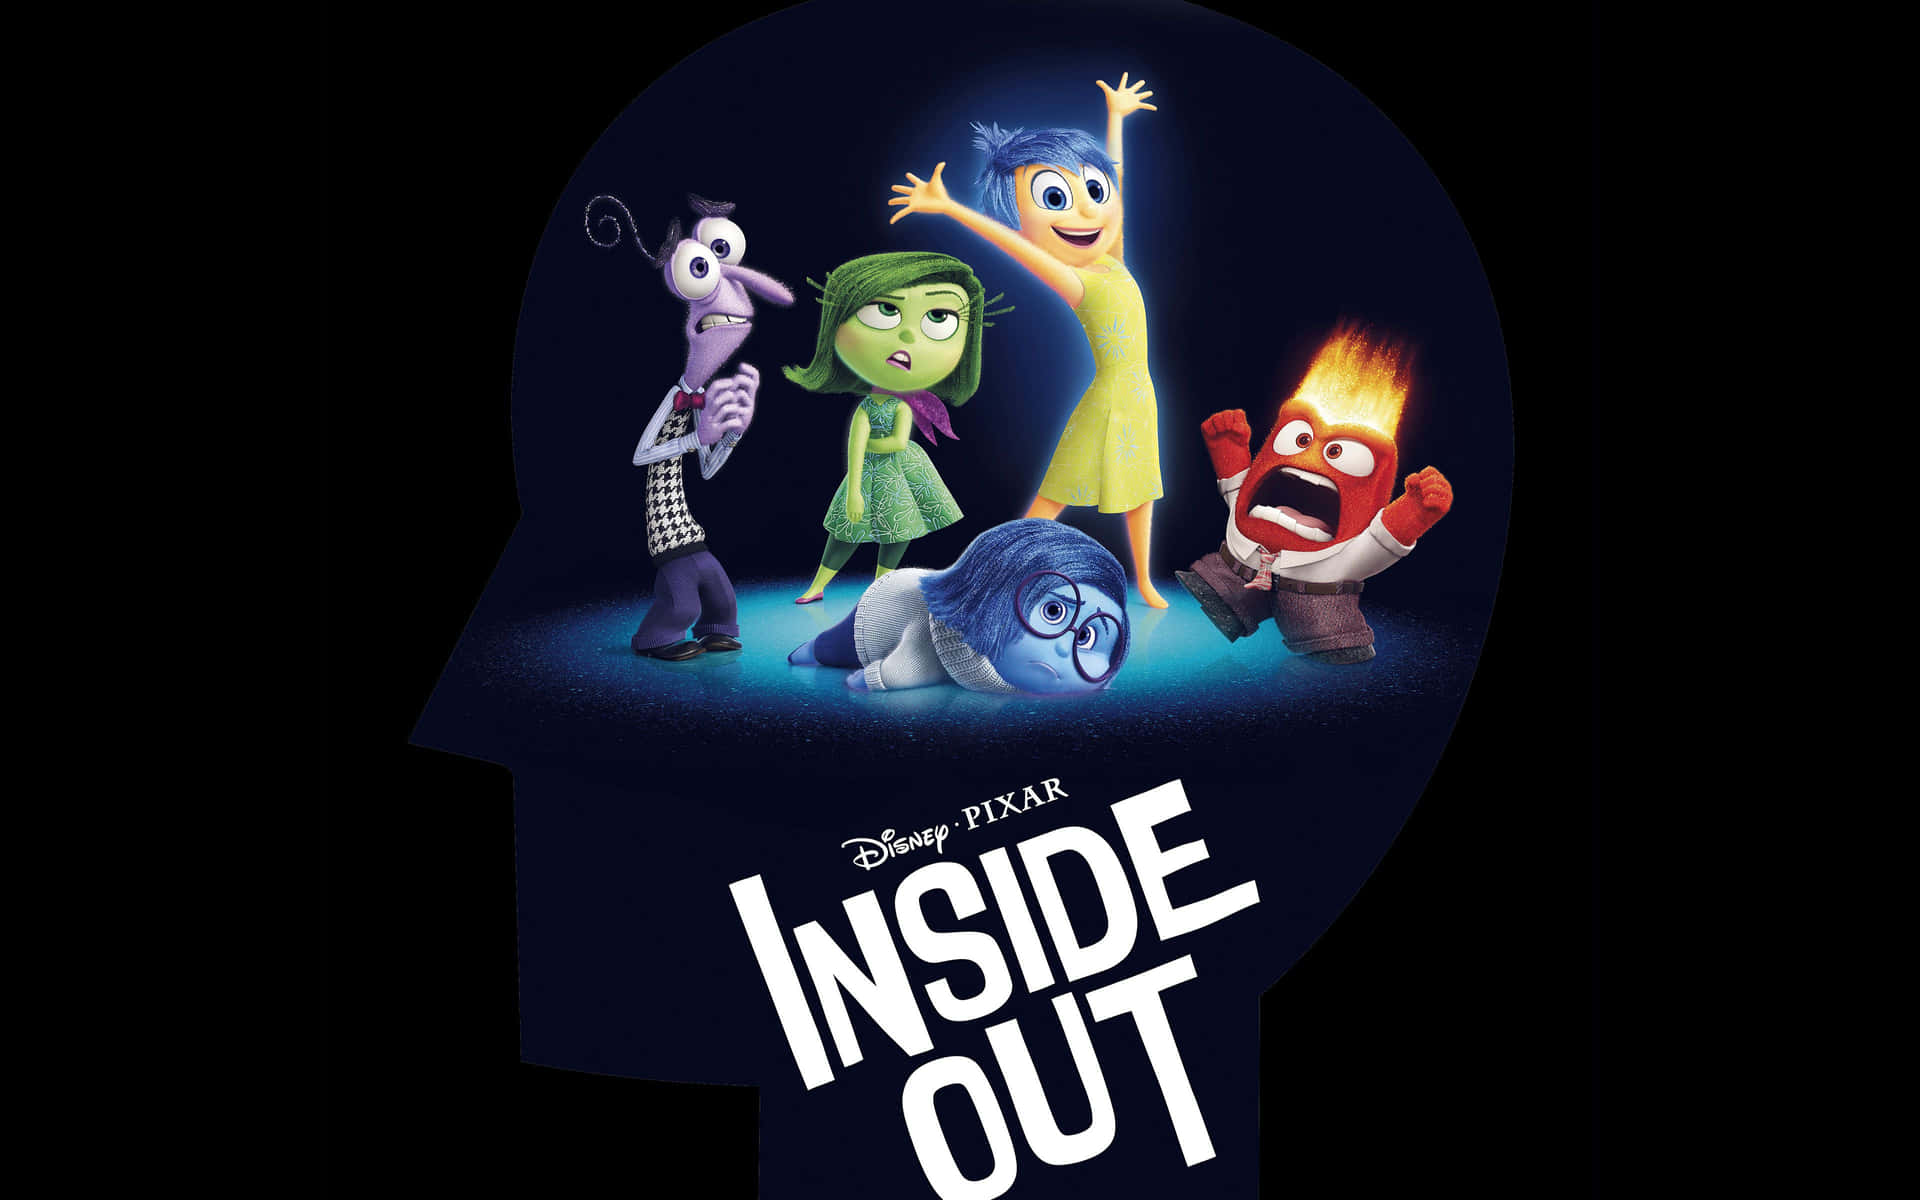 Follow Riley's Emotions on the Rollercoaster Ride of Life! - The movie "Inside Out"